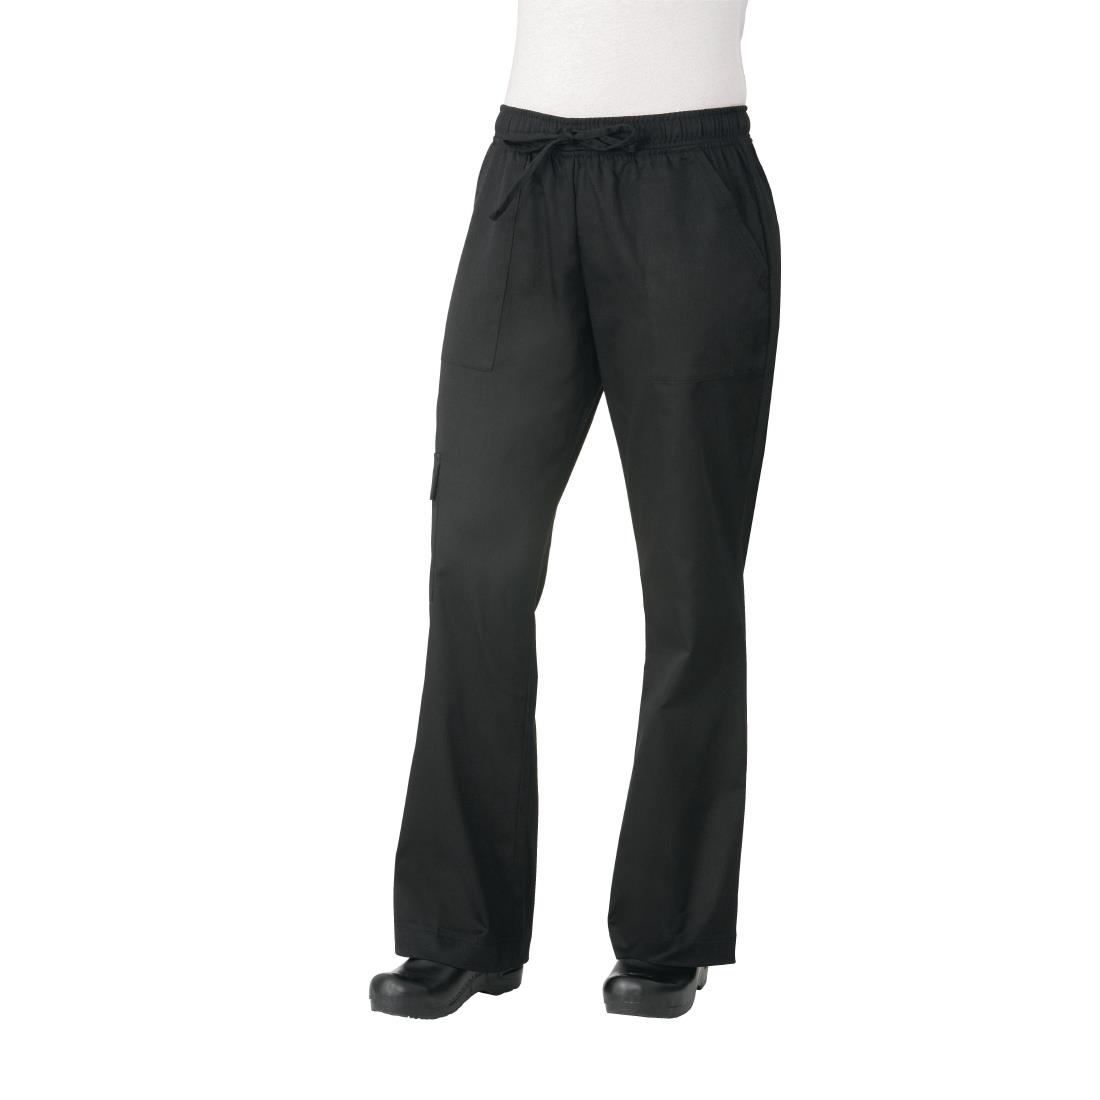 Whites Chefs Apparel DL712-XS Vegas Chefs Trousers - Small Black and White  Check